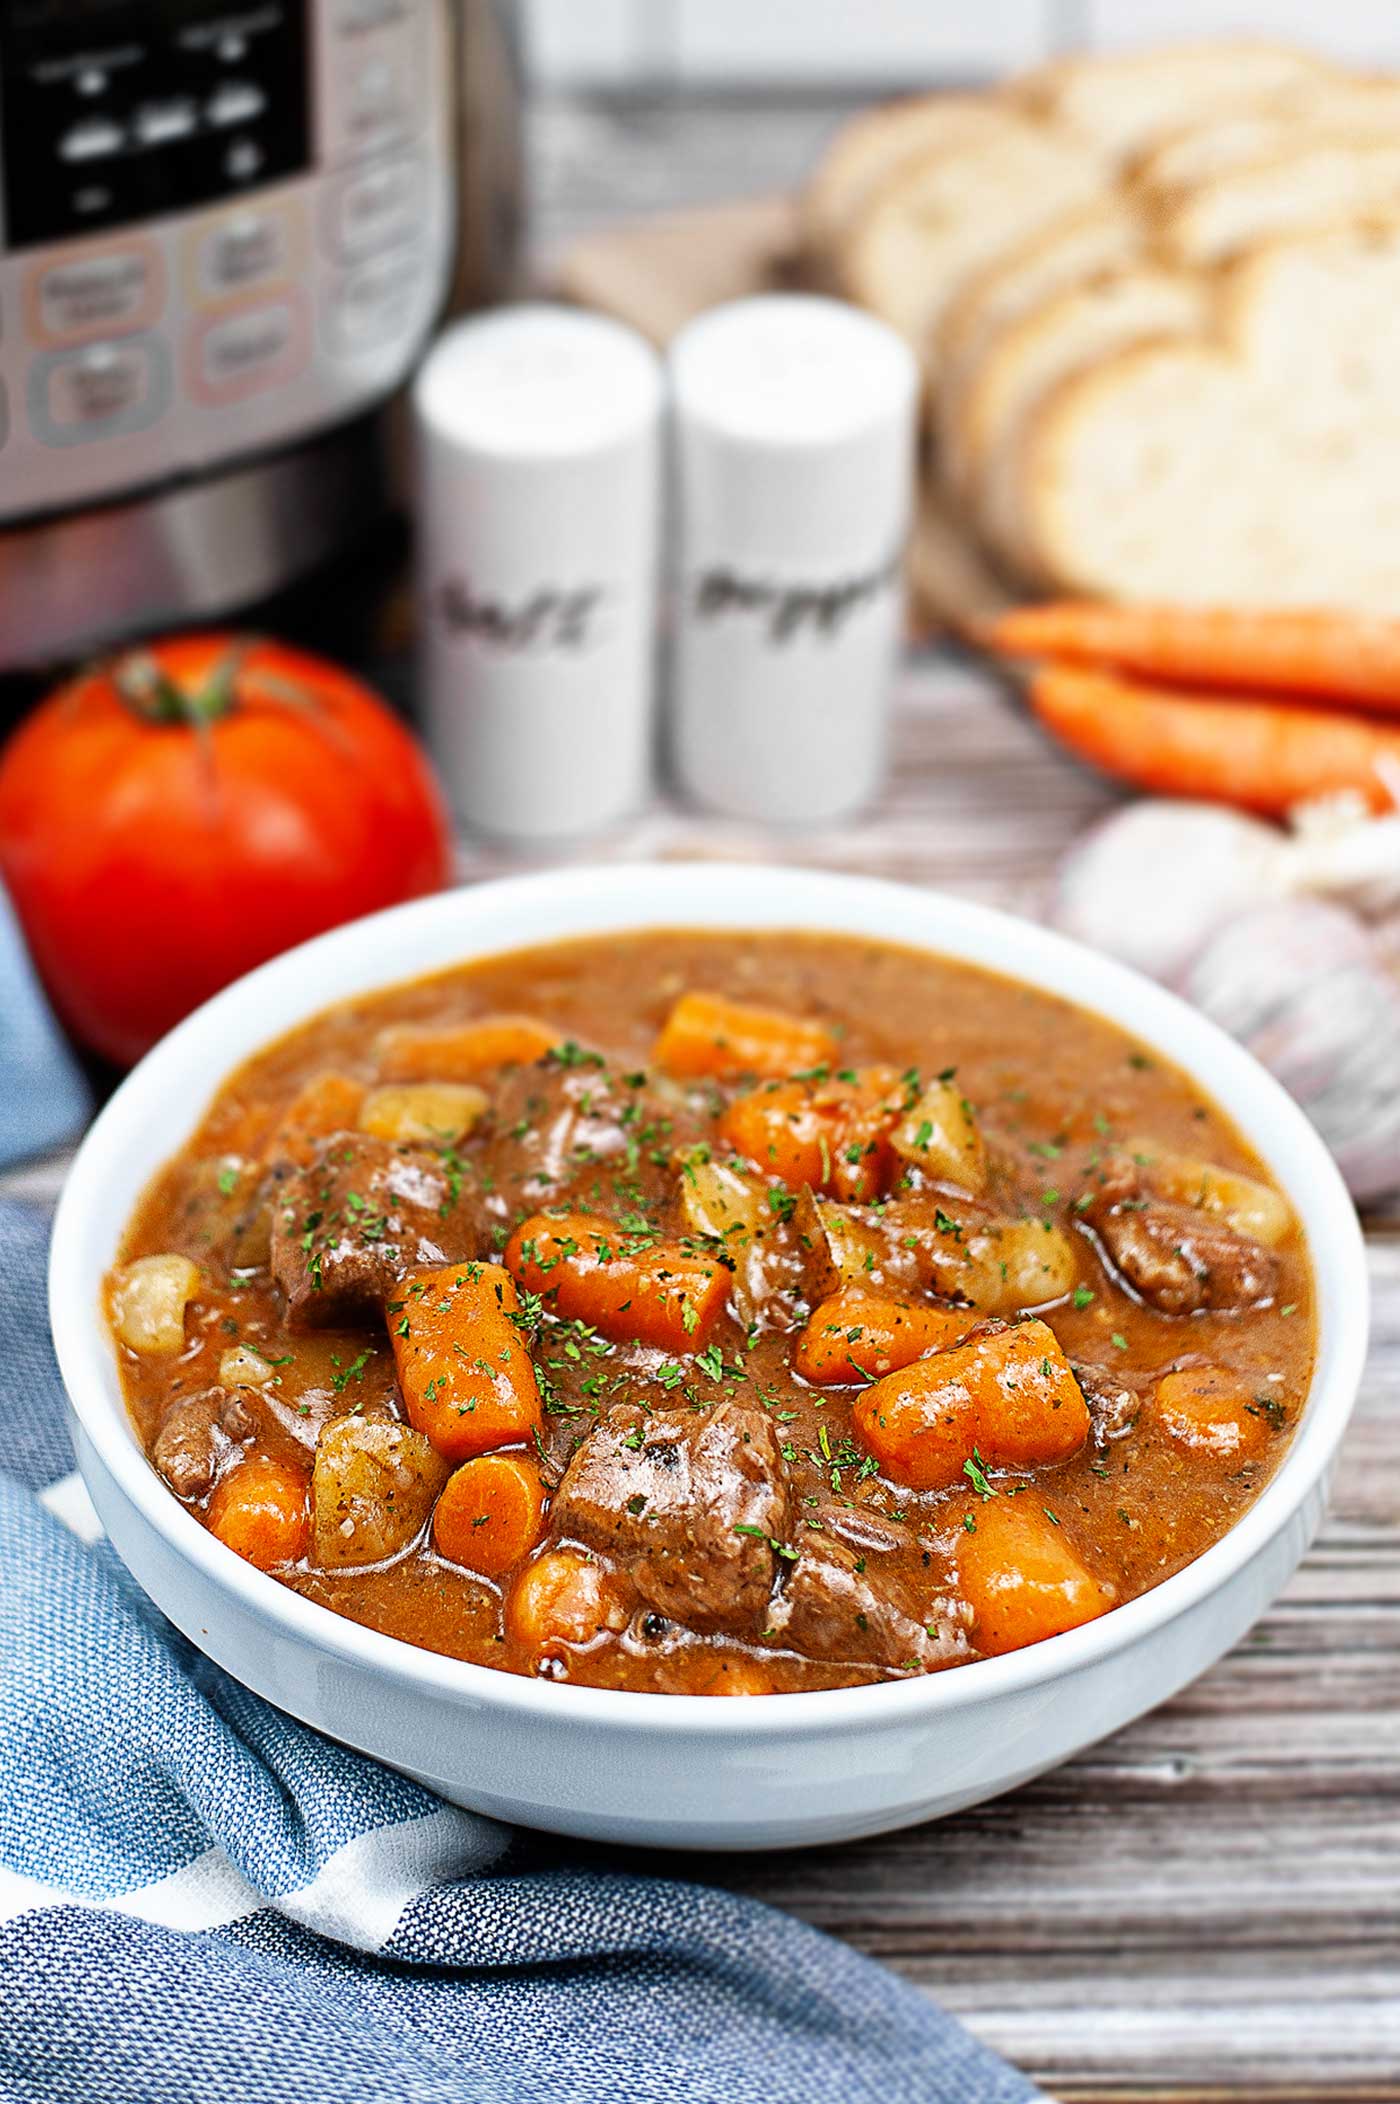 Bowl of Hearty Stew